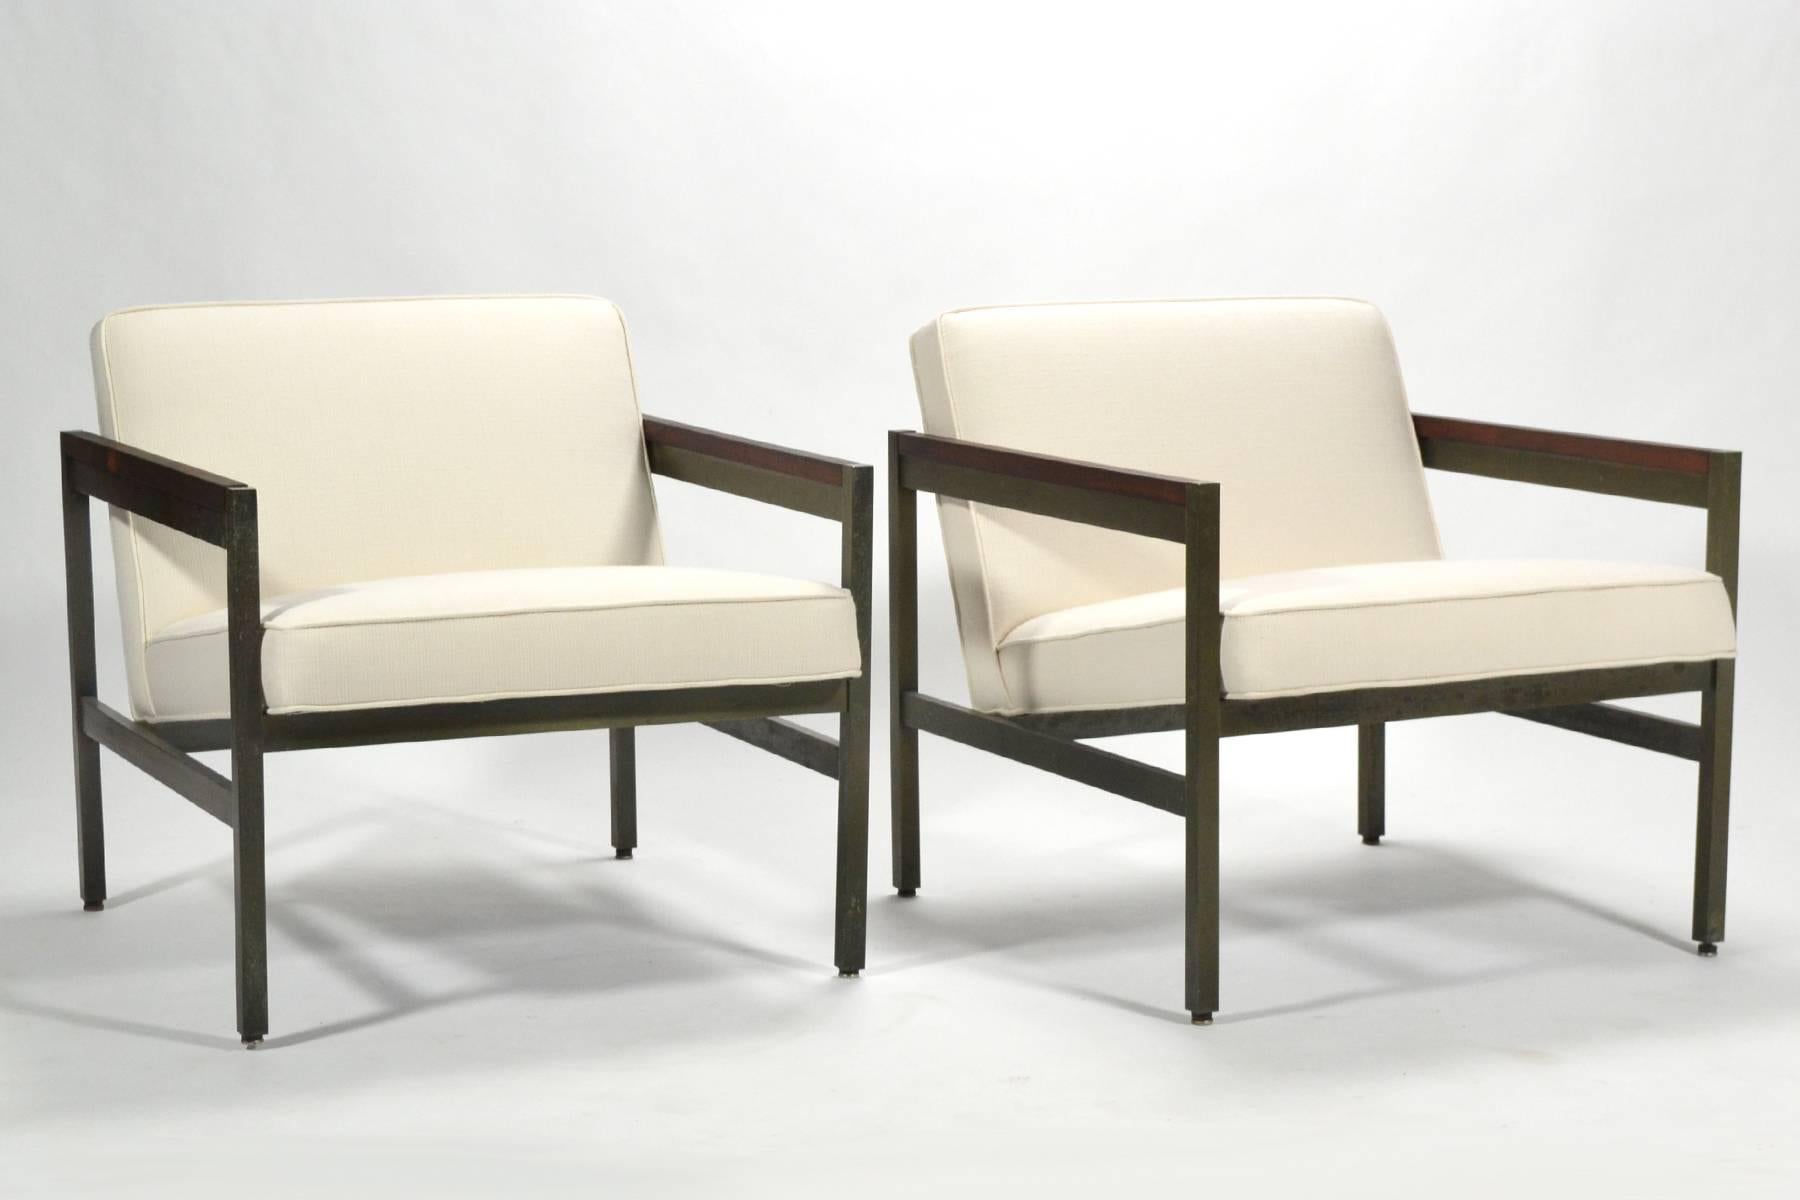 We think this rare pair of Michael Taylor model 899 lounge chairs by Baker are simply exquisite. They have a beautiful architecture which reminds us of some of the more restrained designs by George Nelson, but they embrace luxury materials with